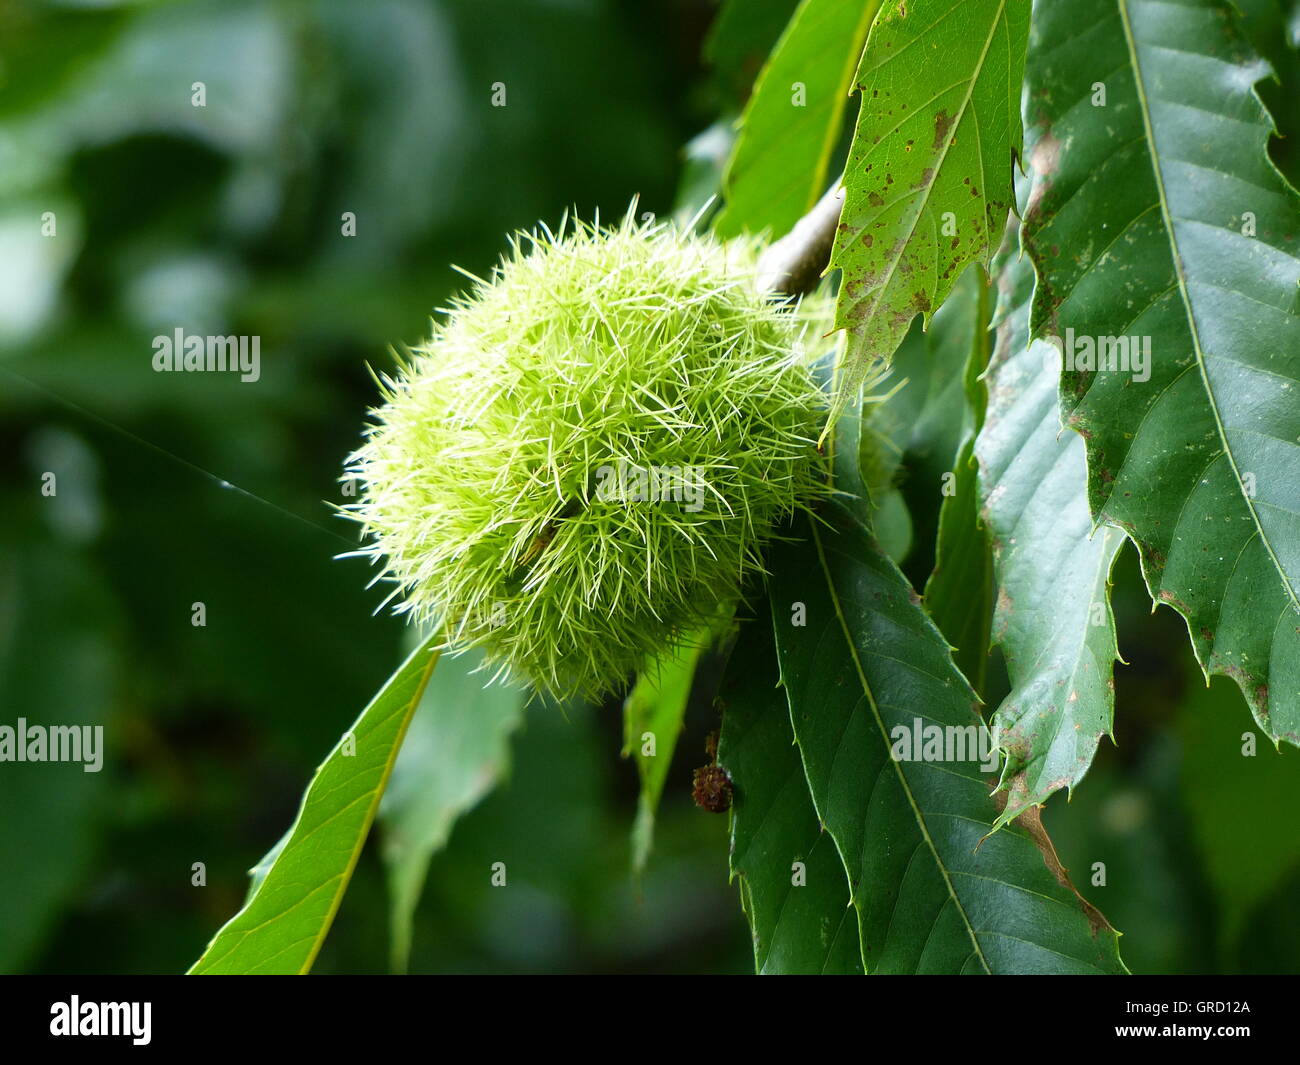 Sweet Chestnut In Its Spiky Shell On The Tree Stock Photo